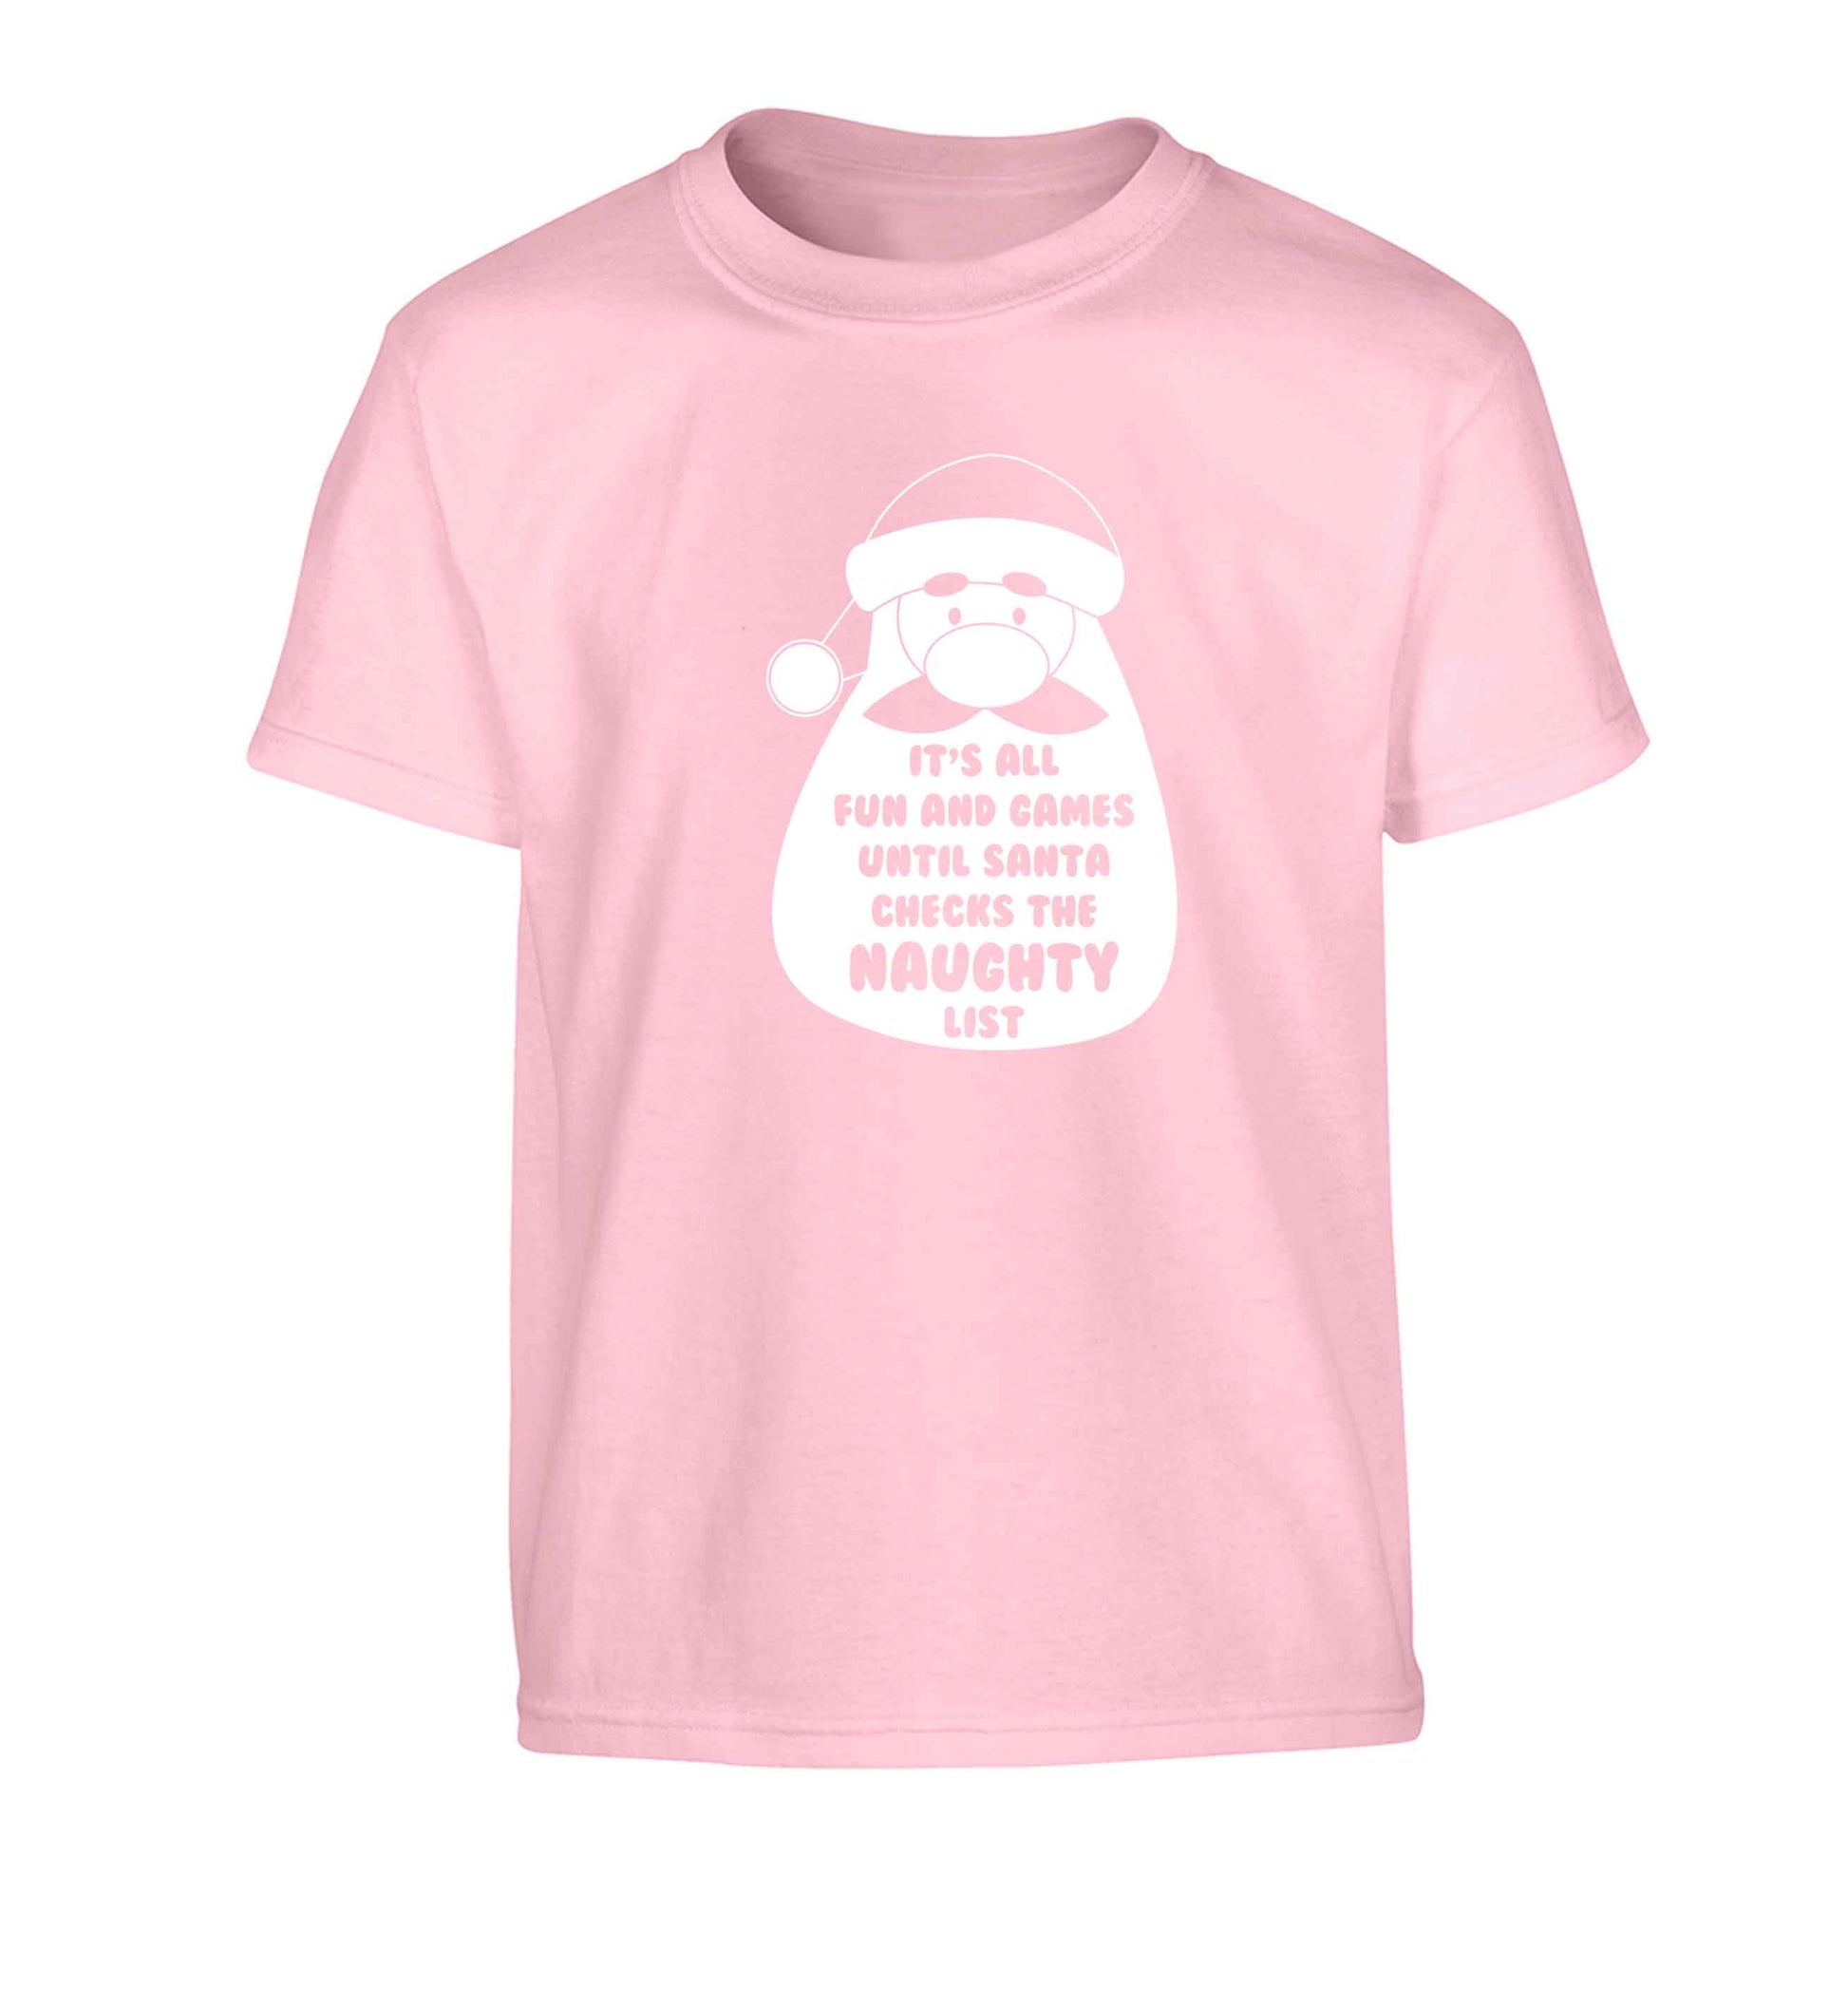 It's all fun and games until Santa checks the naughty list Children's light pink Tshirt 12-13 Years